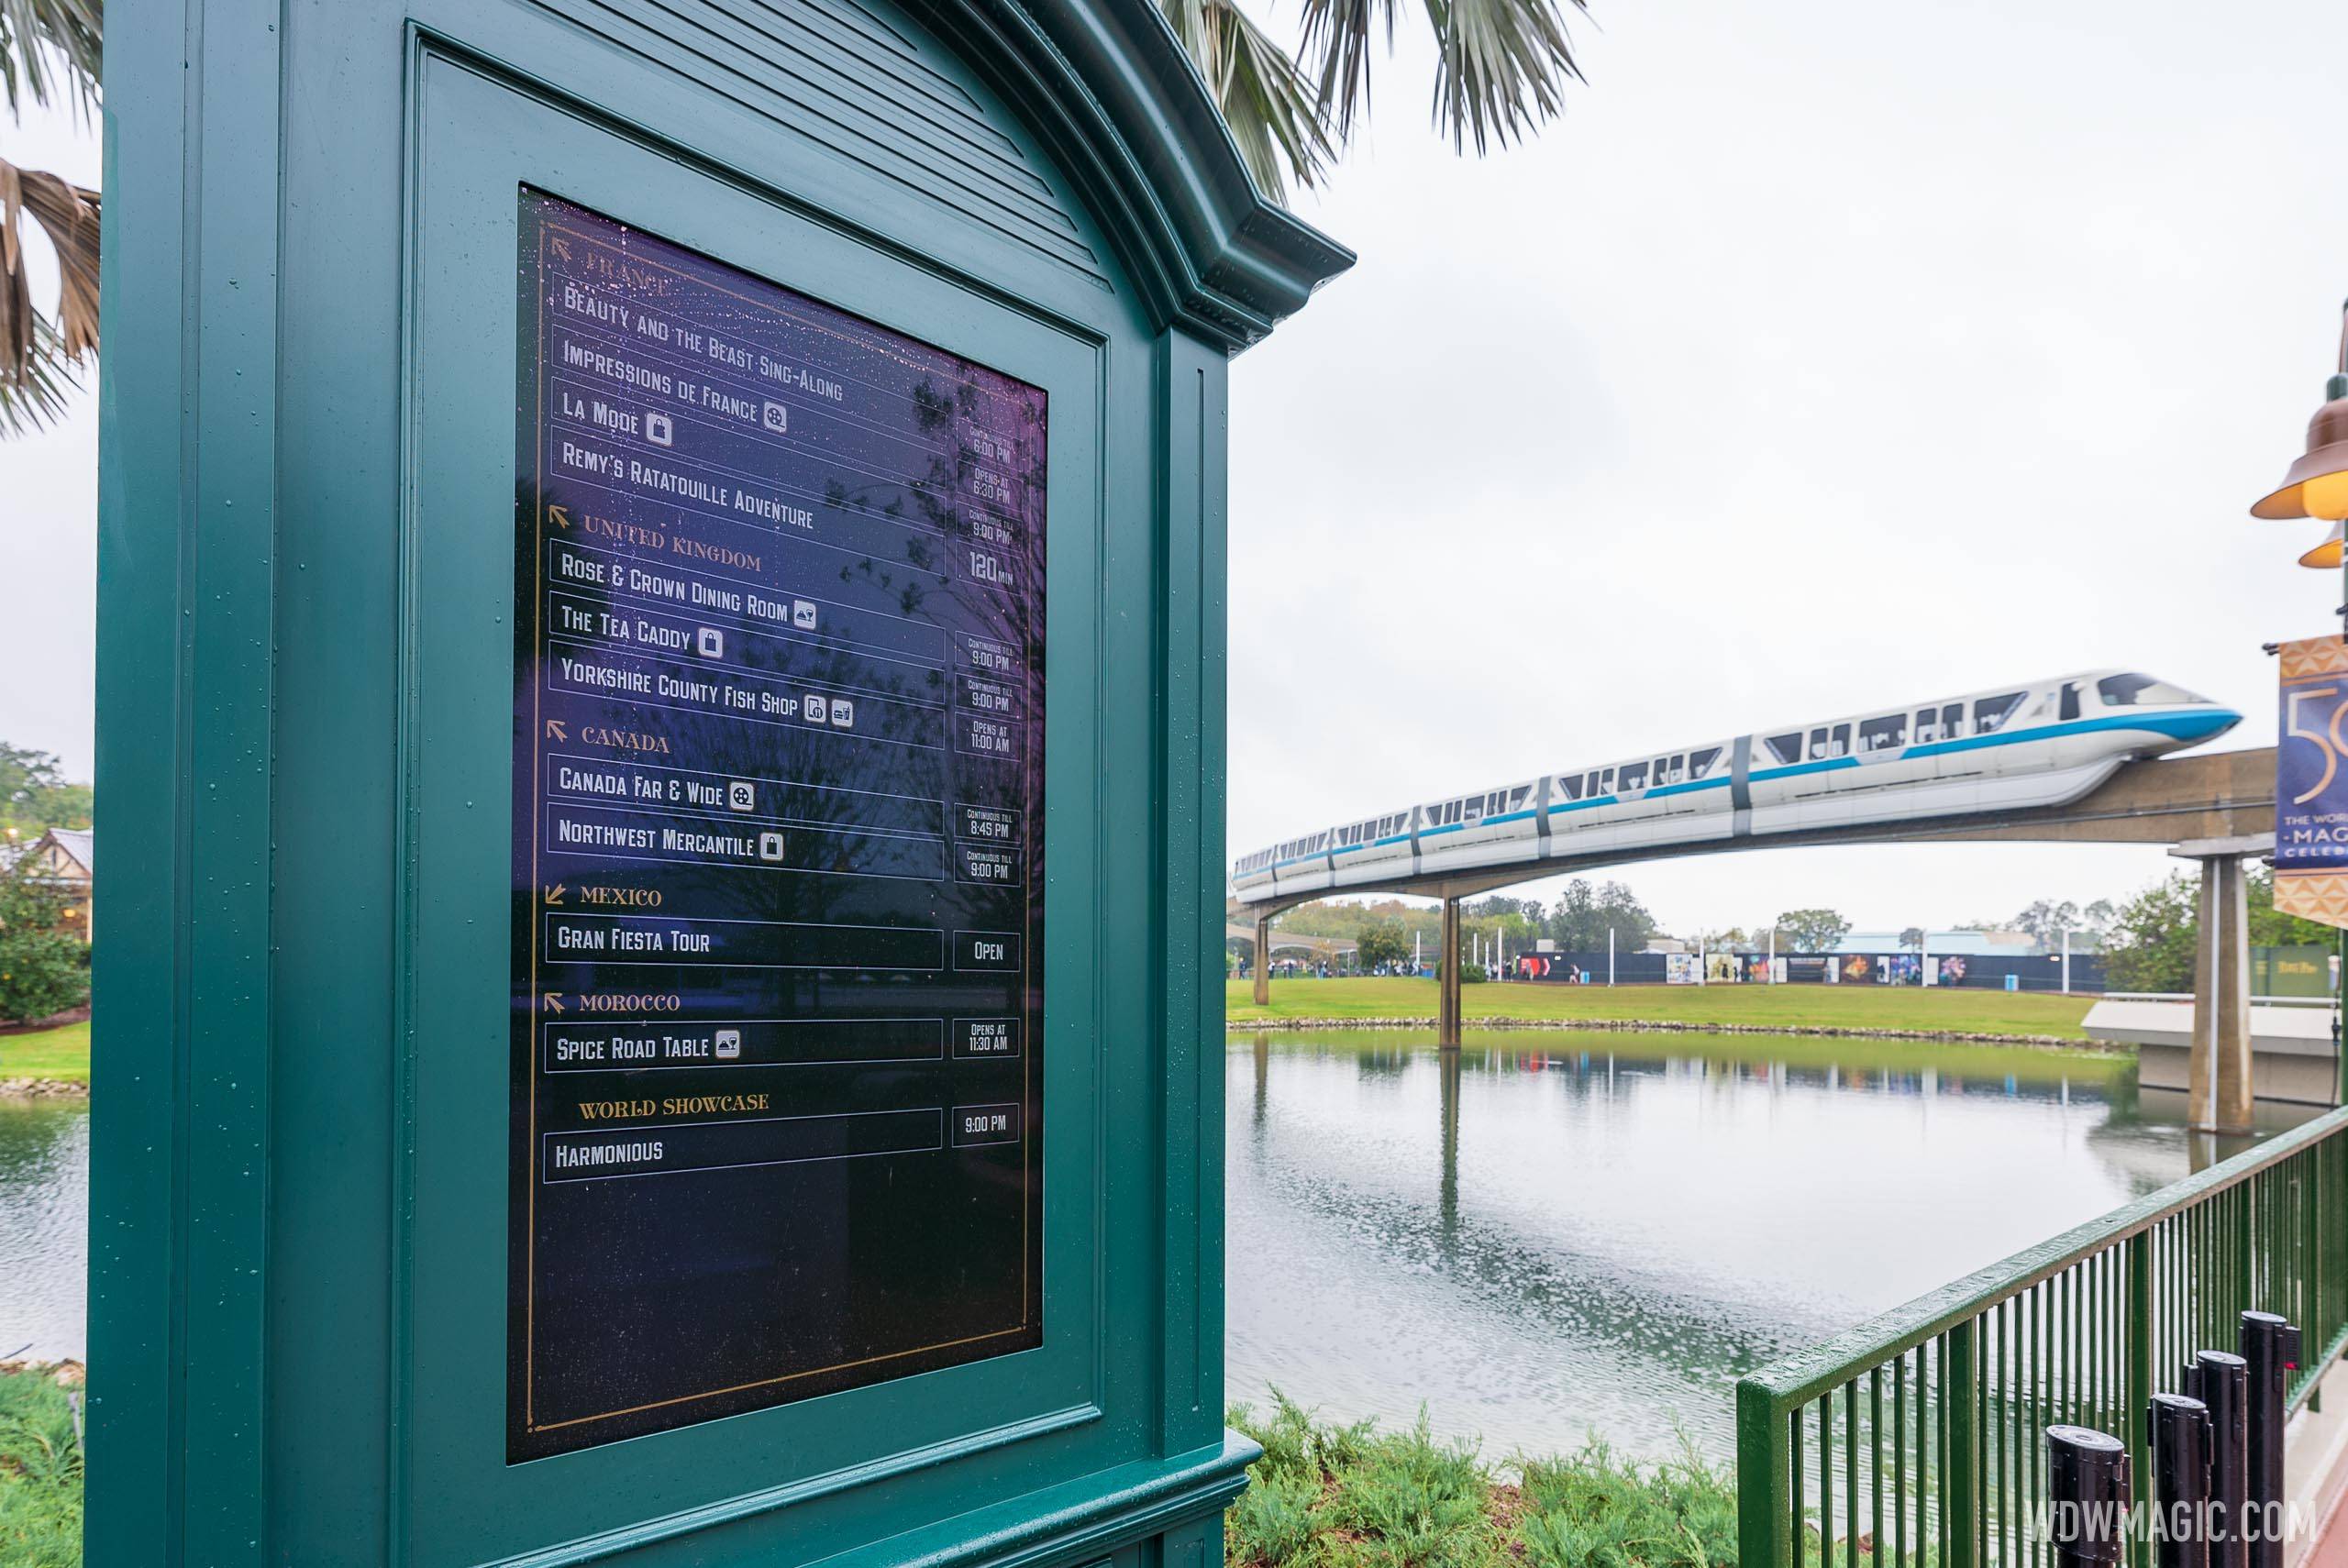 Themed Digital Tip Boards around EPCOT